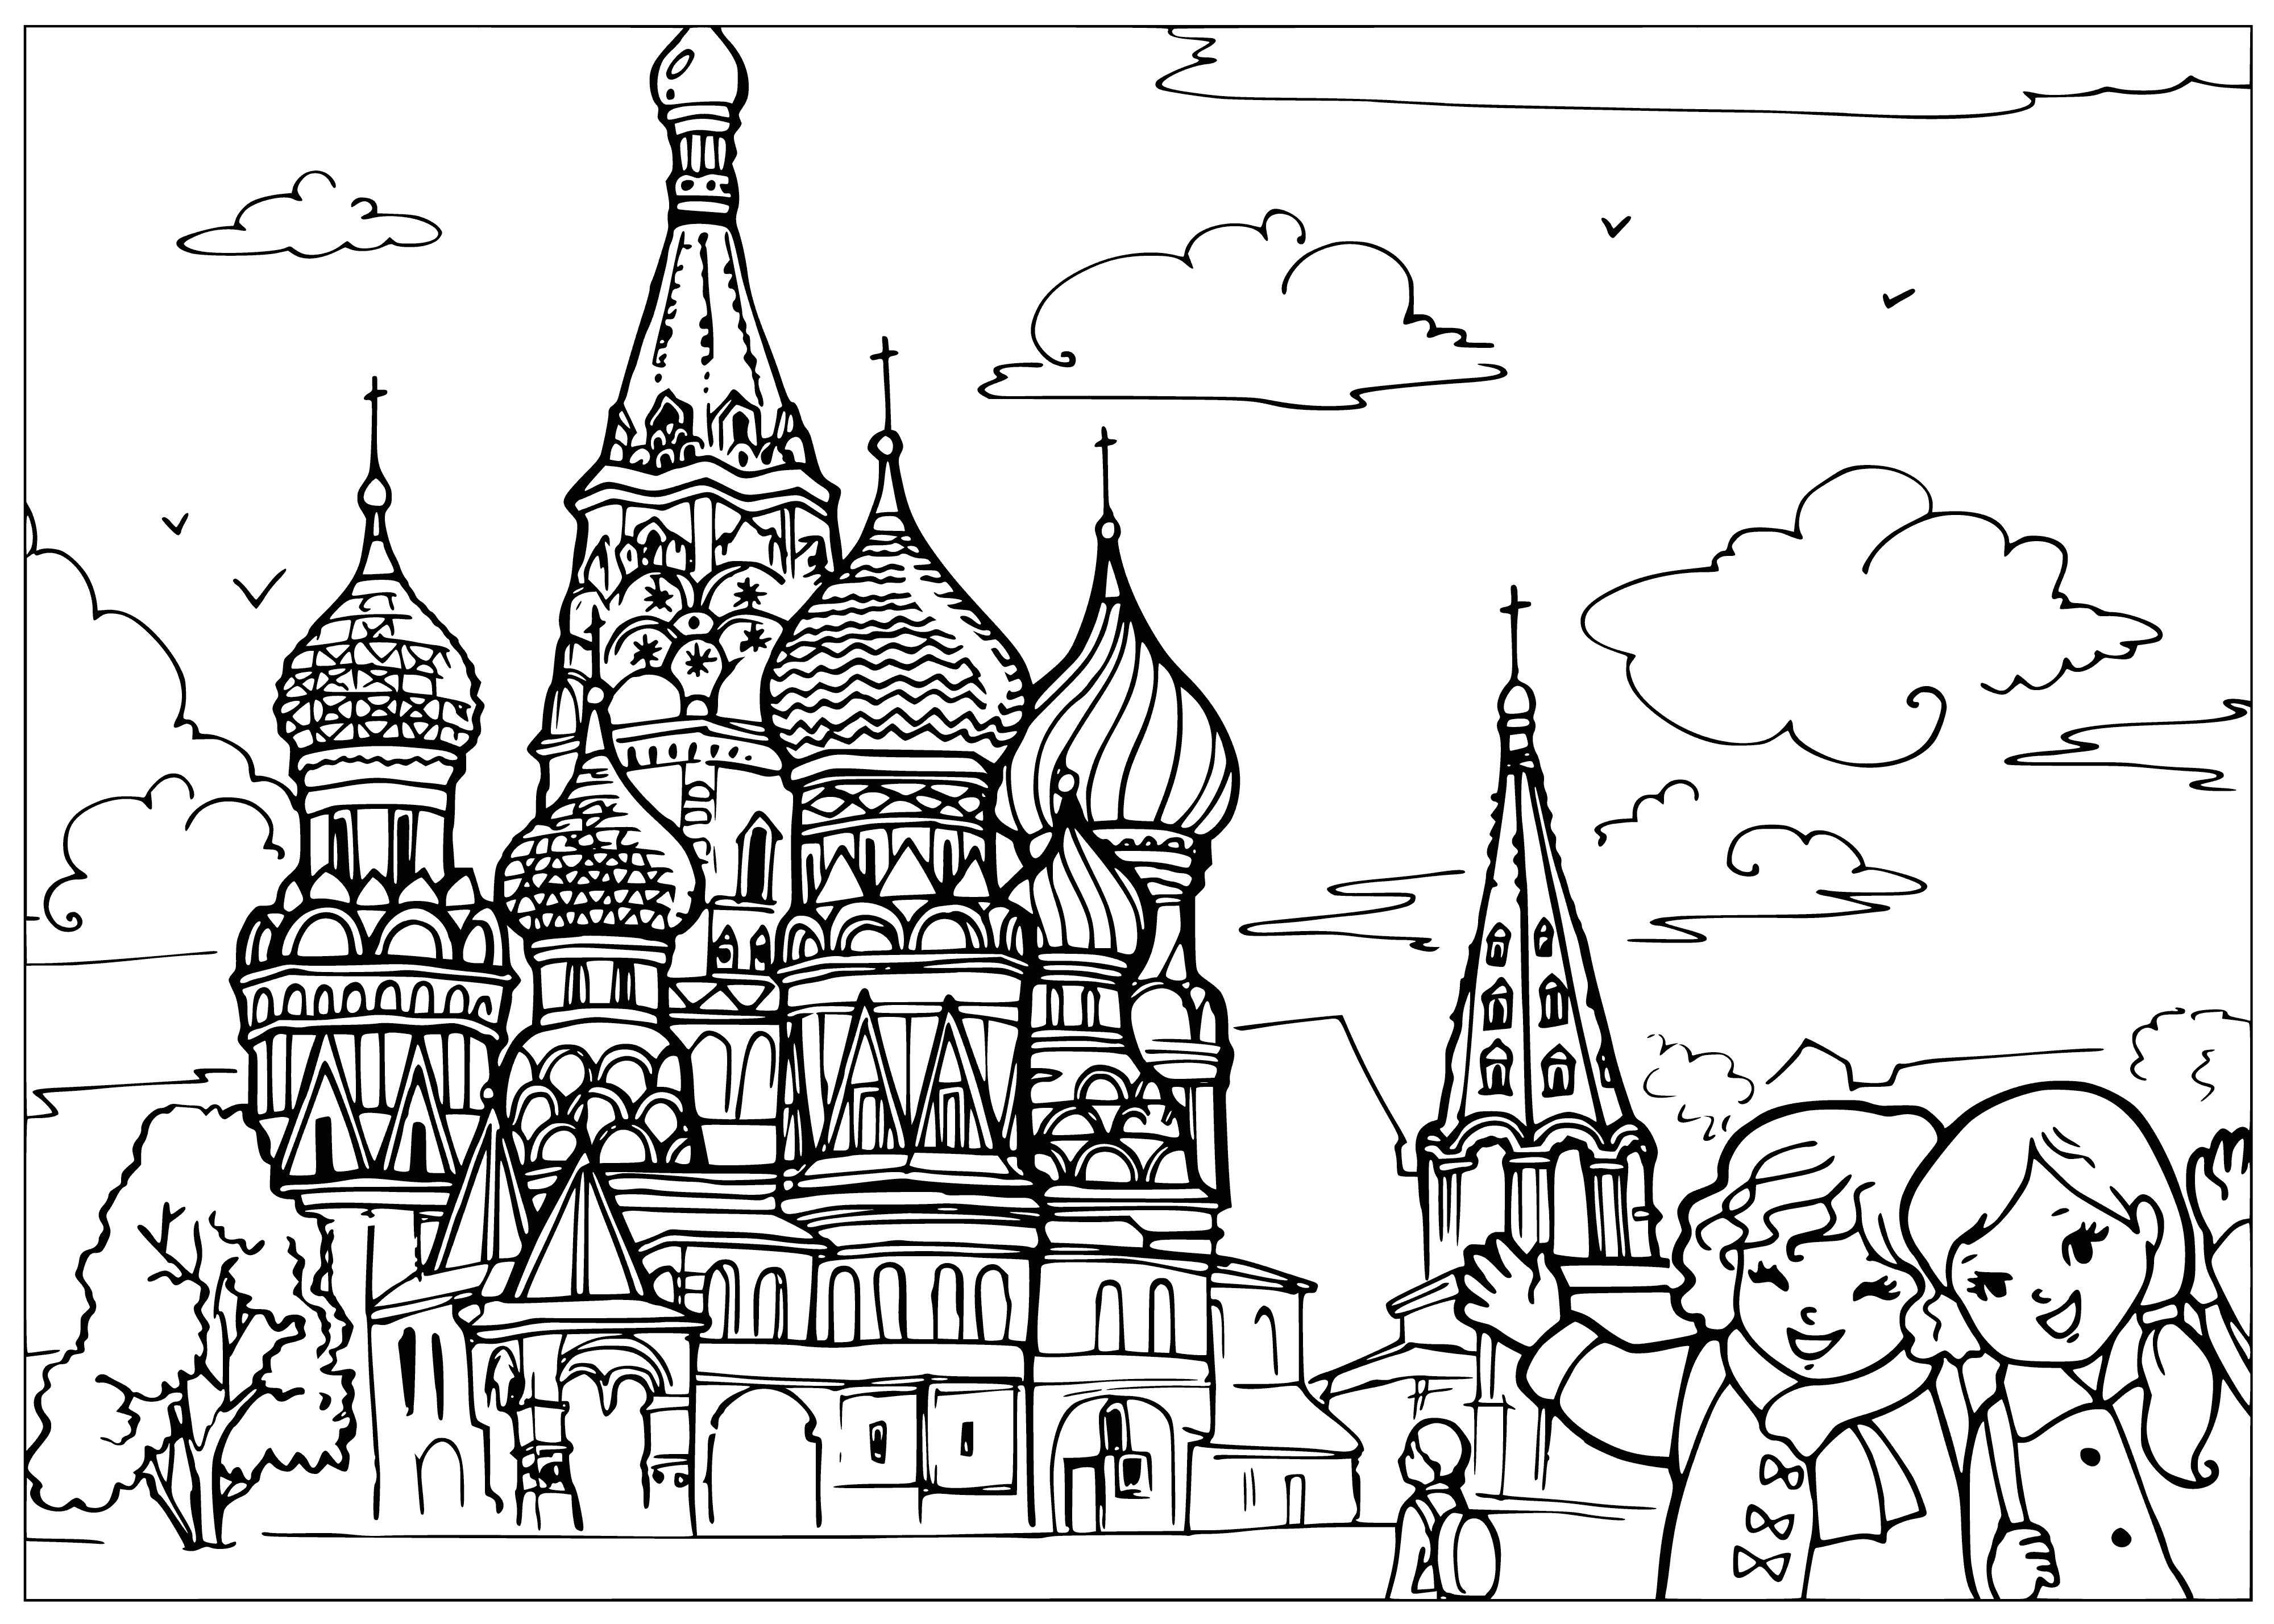 coloring page: St. Basil's Cathedral in Moscow, Russia was commissioned by Ivan the Terrible in 1555 and is dedicated to the Virgin Mary. It's the tallest Red Square building with iconic onion domes and a symbol of the city.